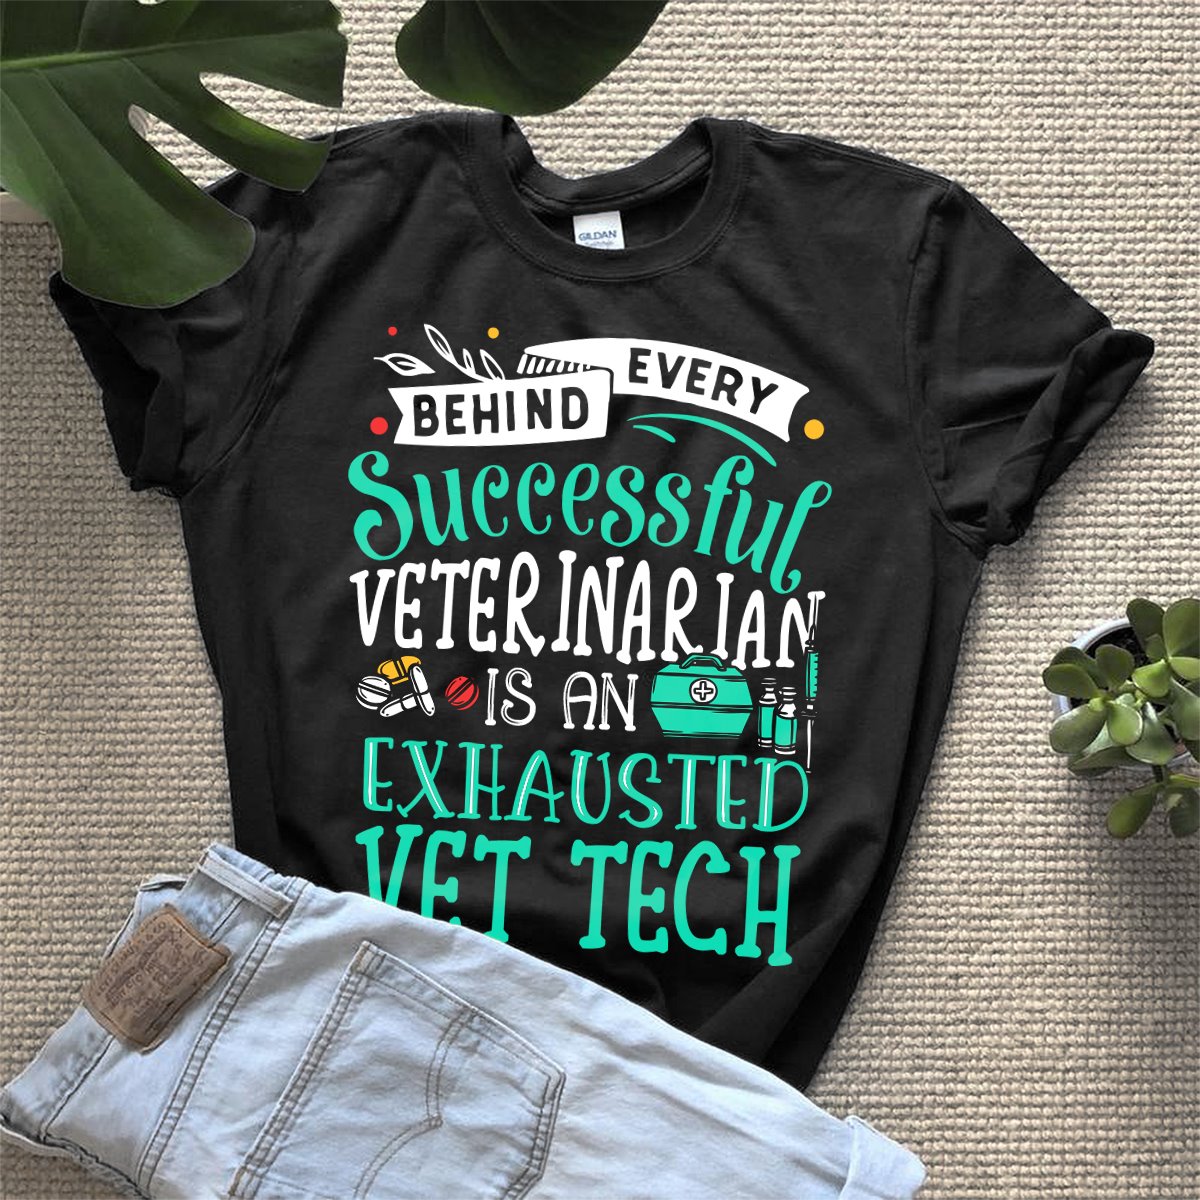 Behind every successful veterinarian is an exhausted vet tech - Nurse